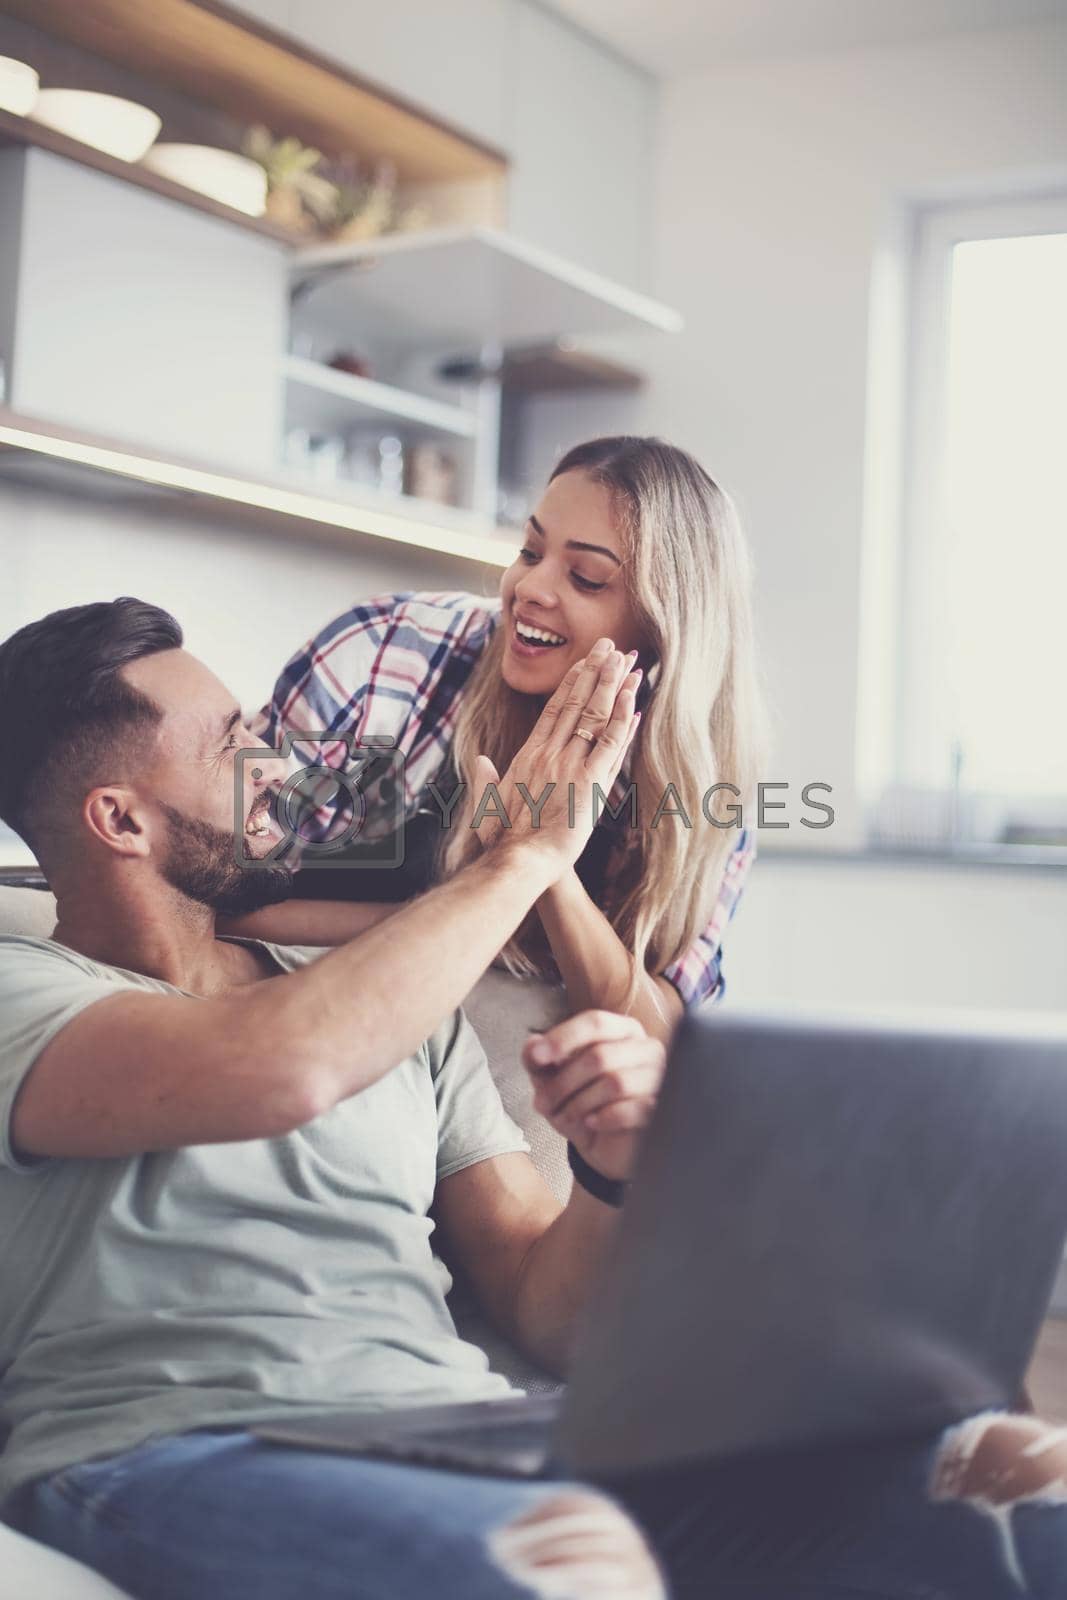 Royalty free image of happy couple giving each other a high five by asdf